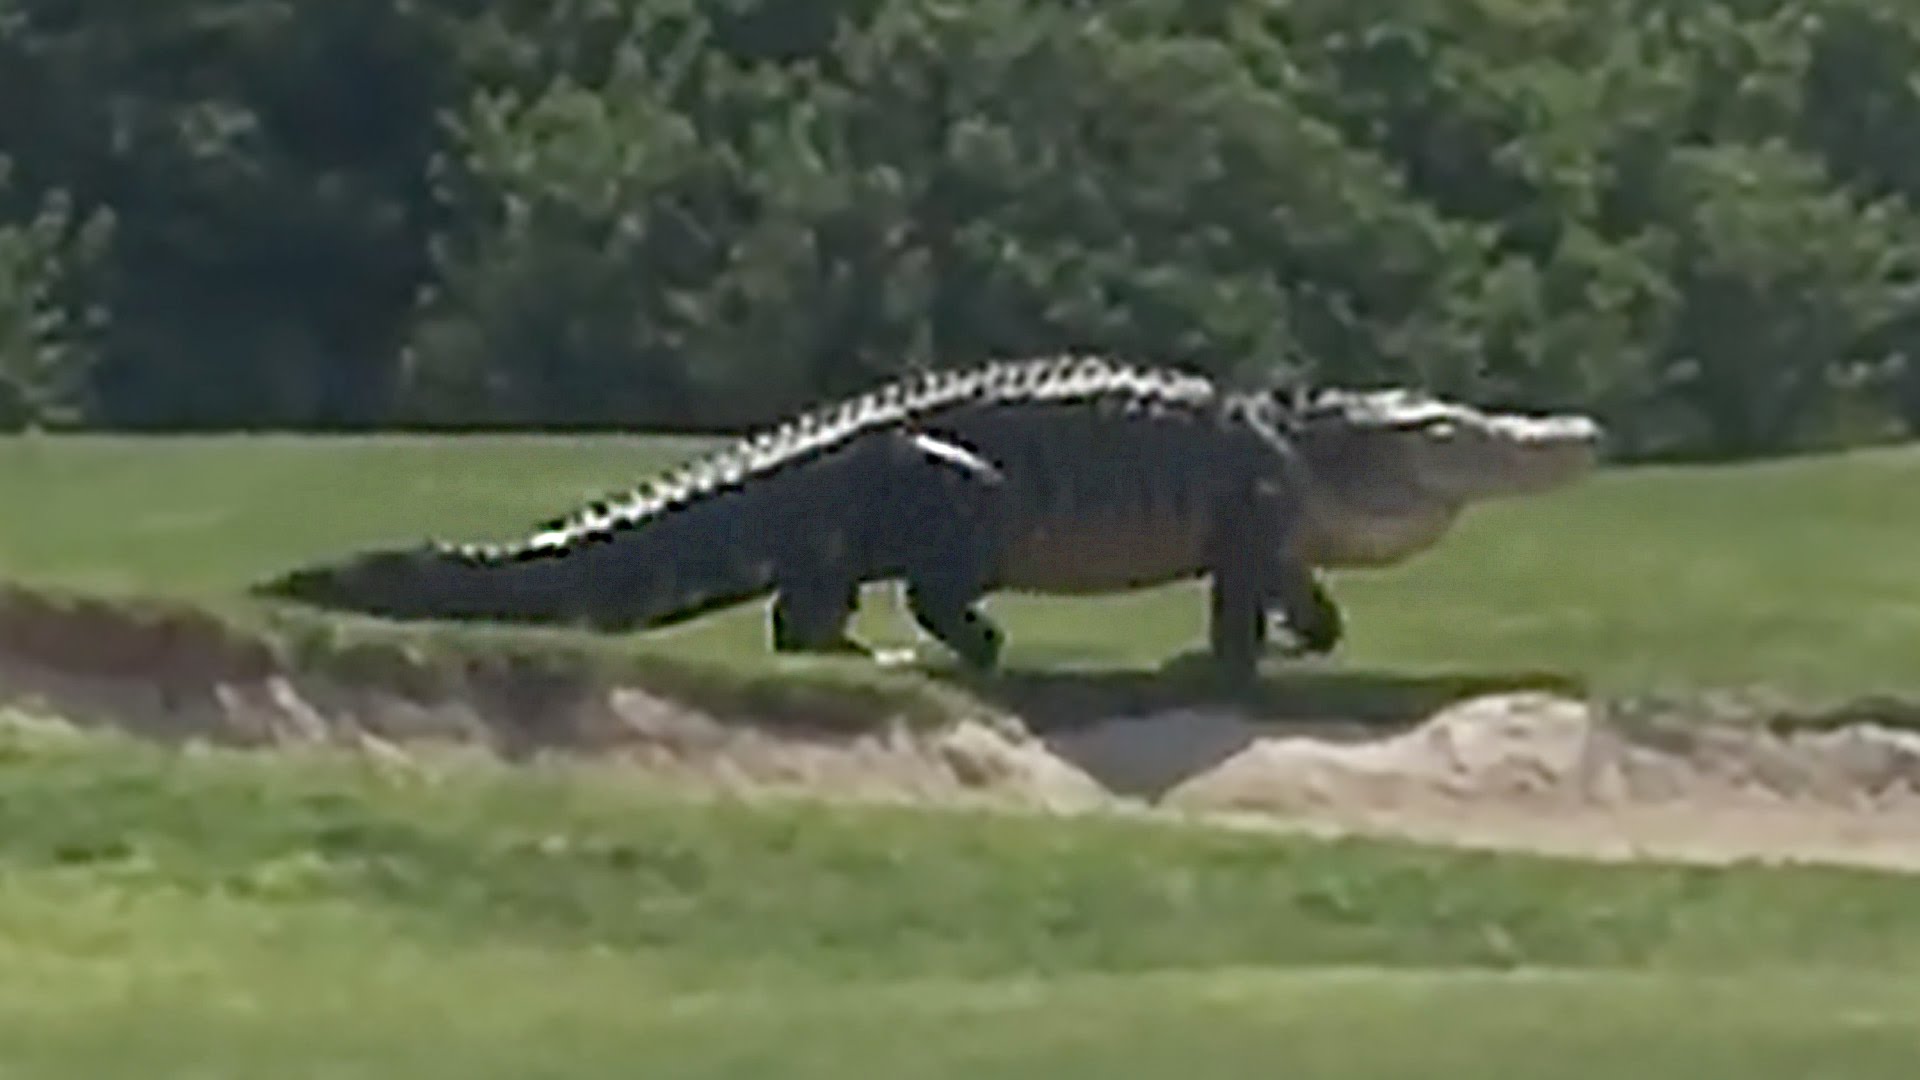 Monster Alligator Caught on Florida Golf Course, Fake or Real? - YouTube